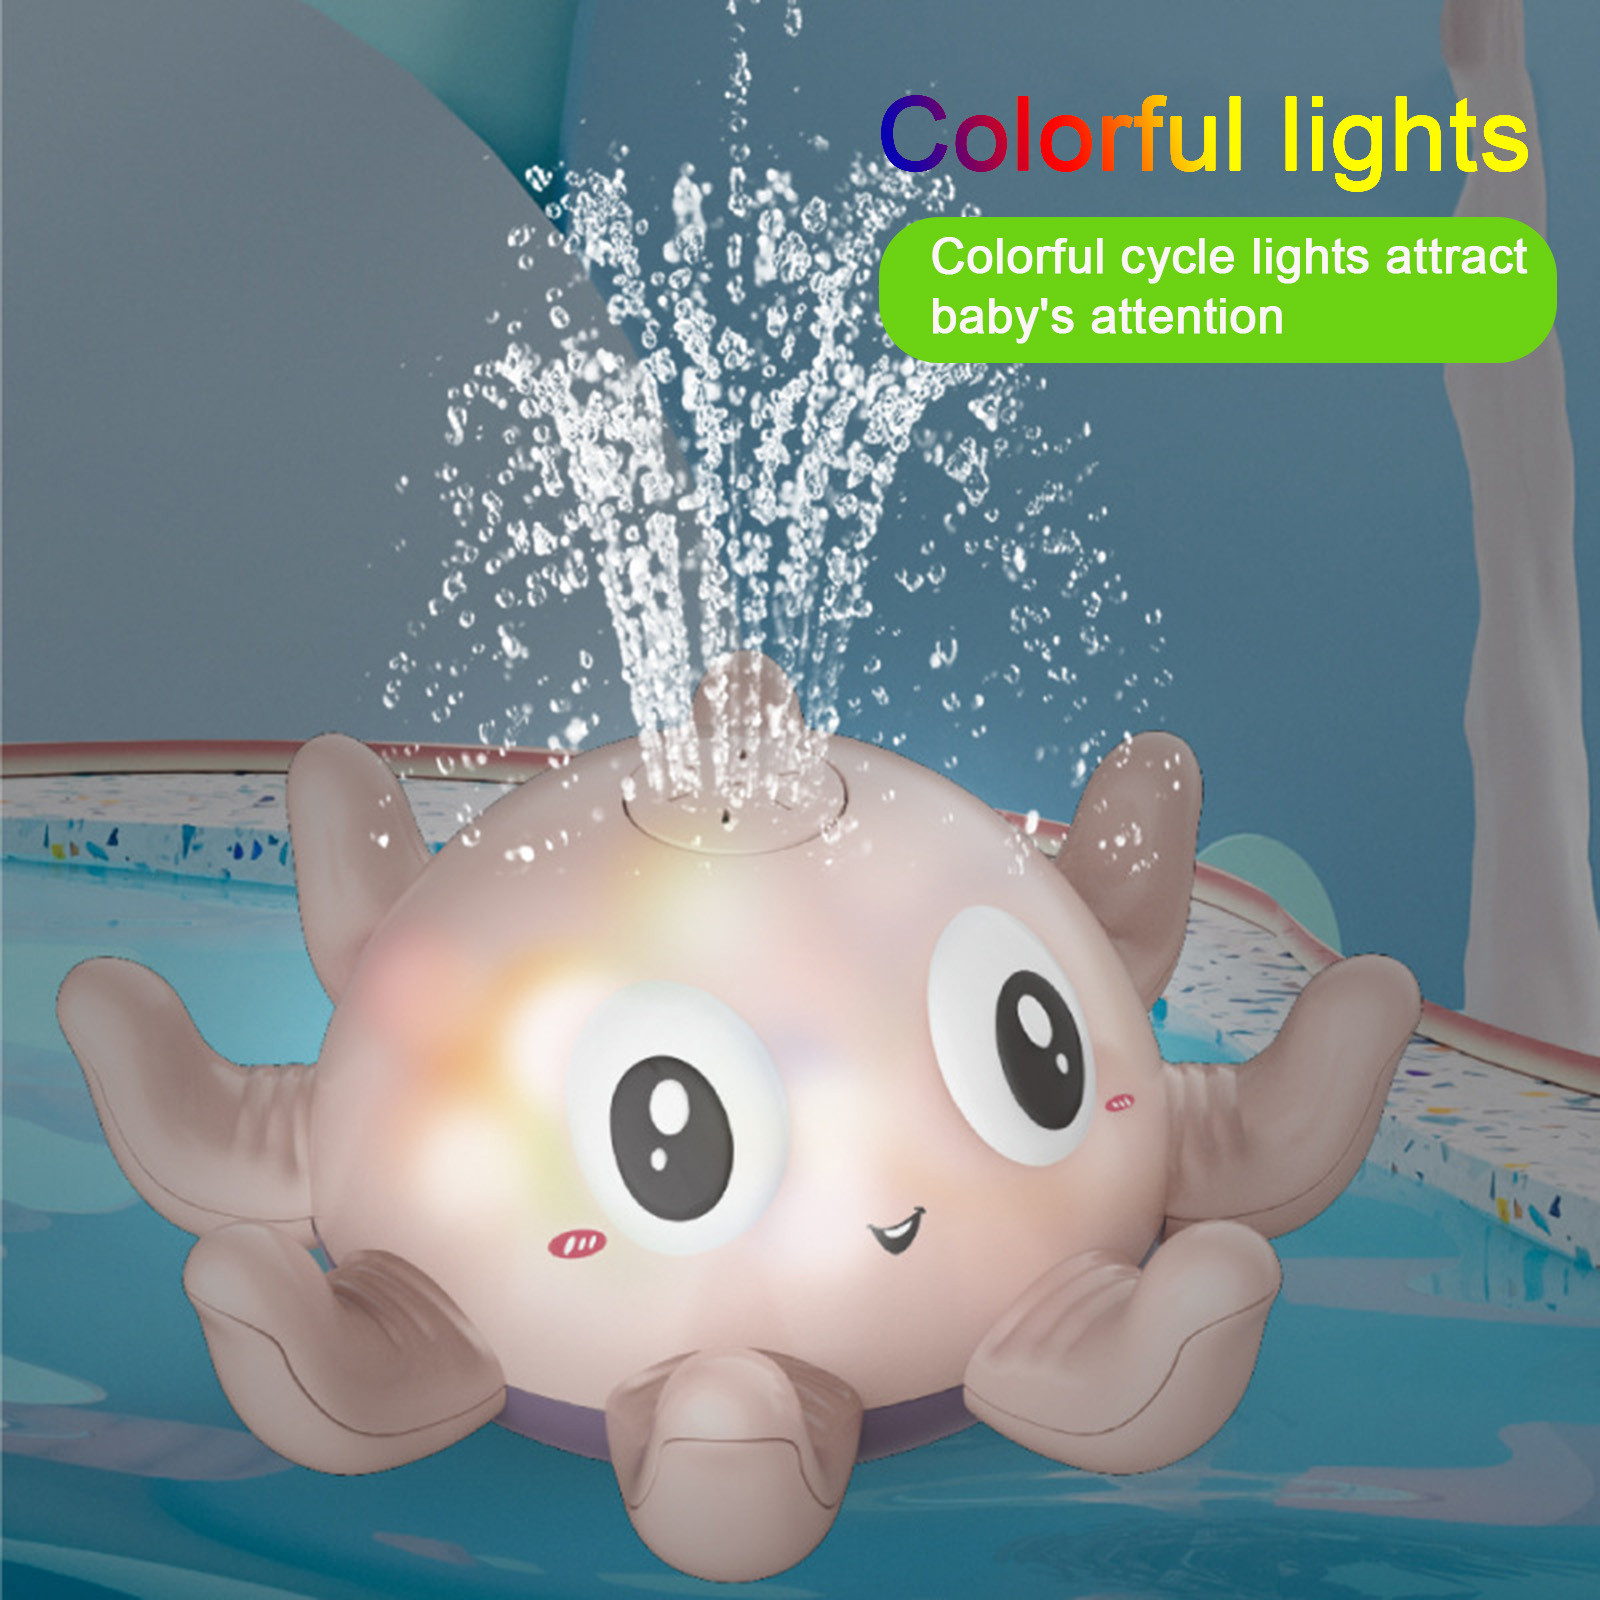 Colorful and Friendly Design of Bath Octopus Toy